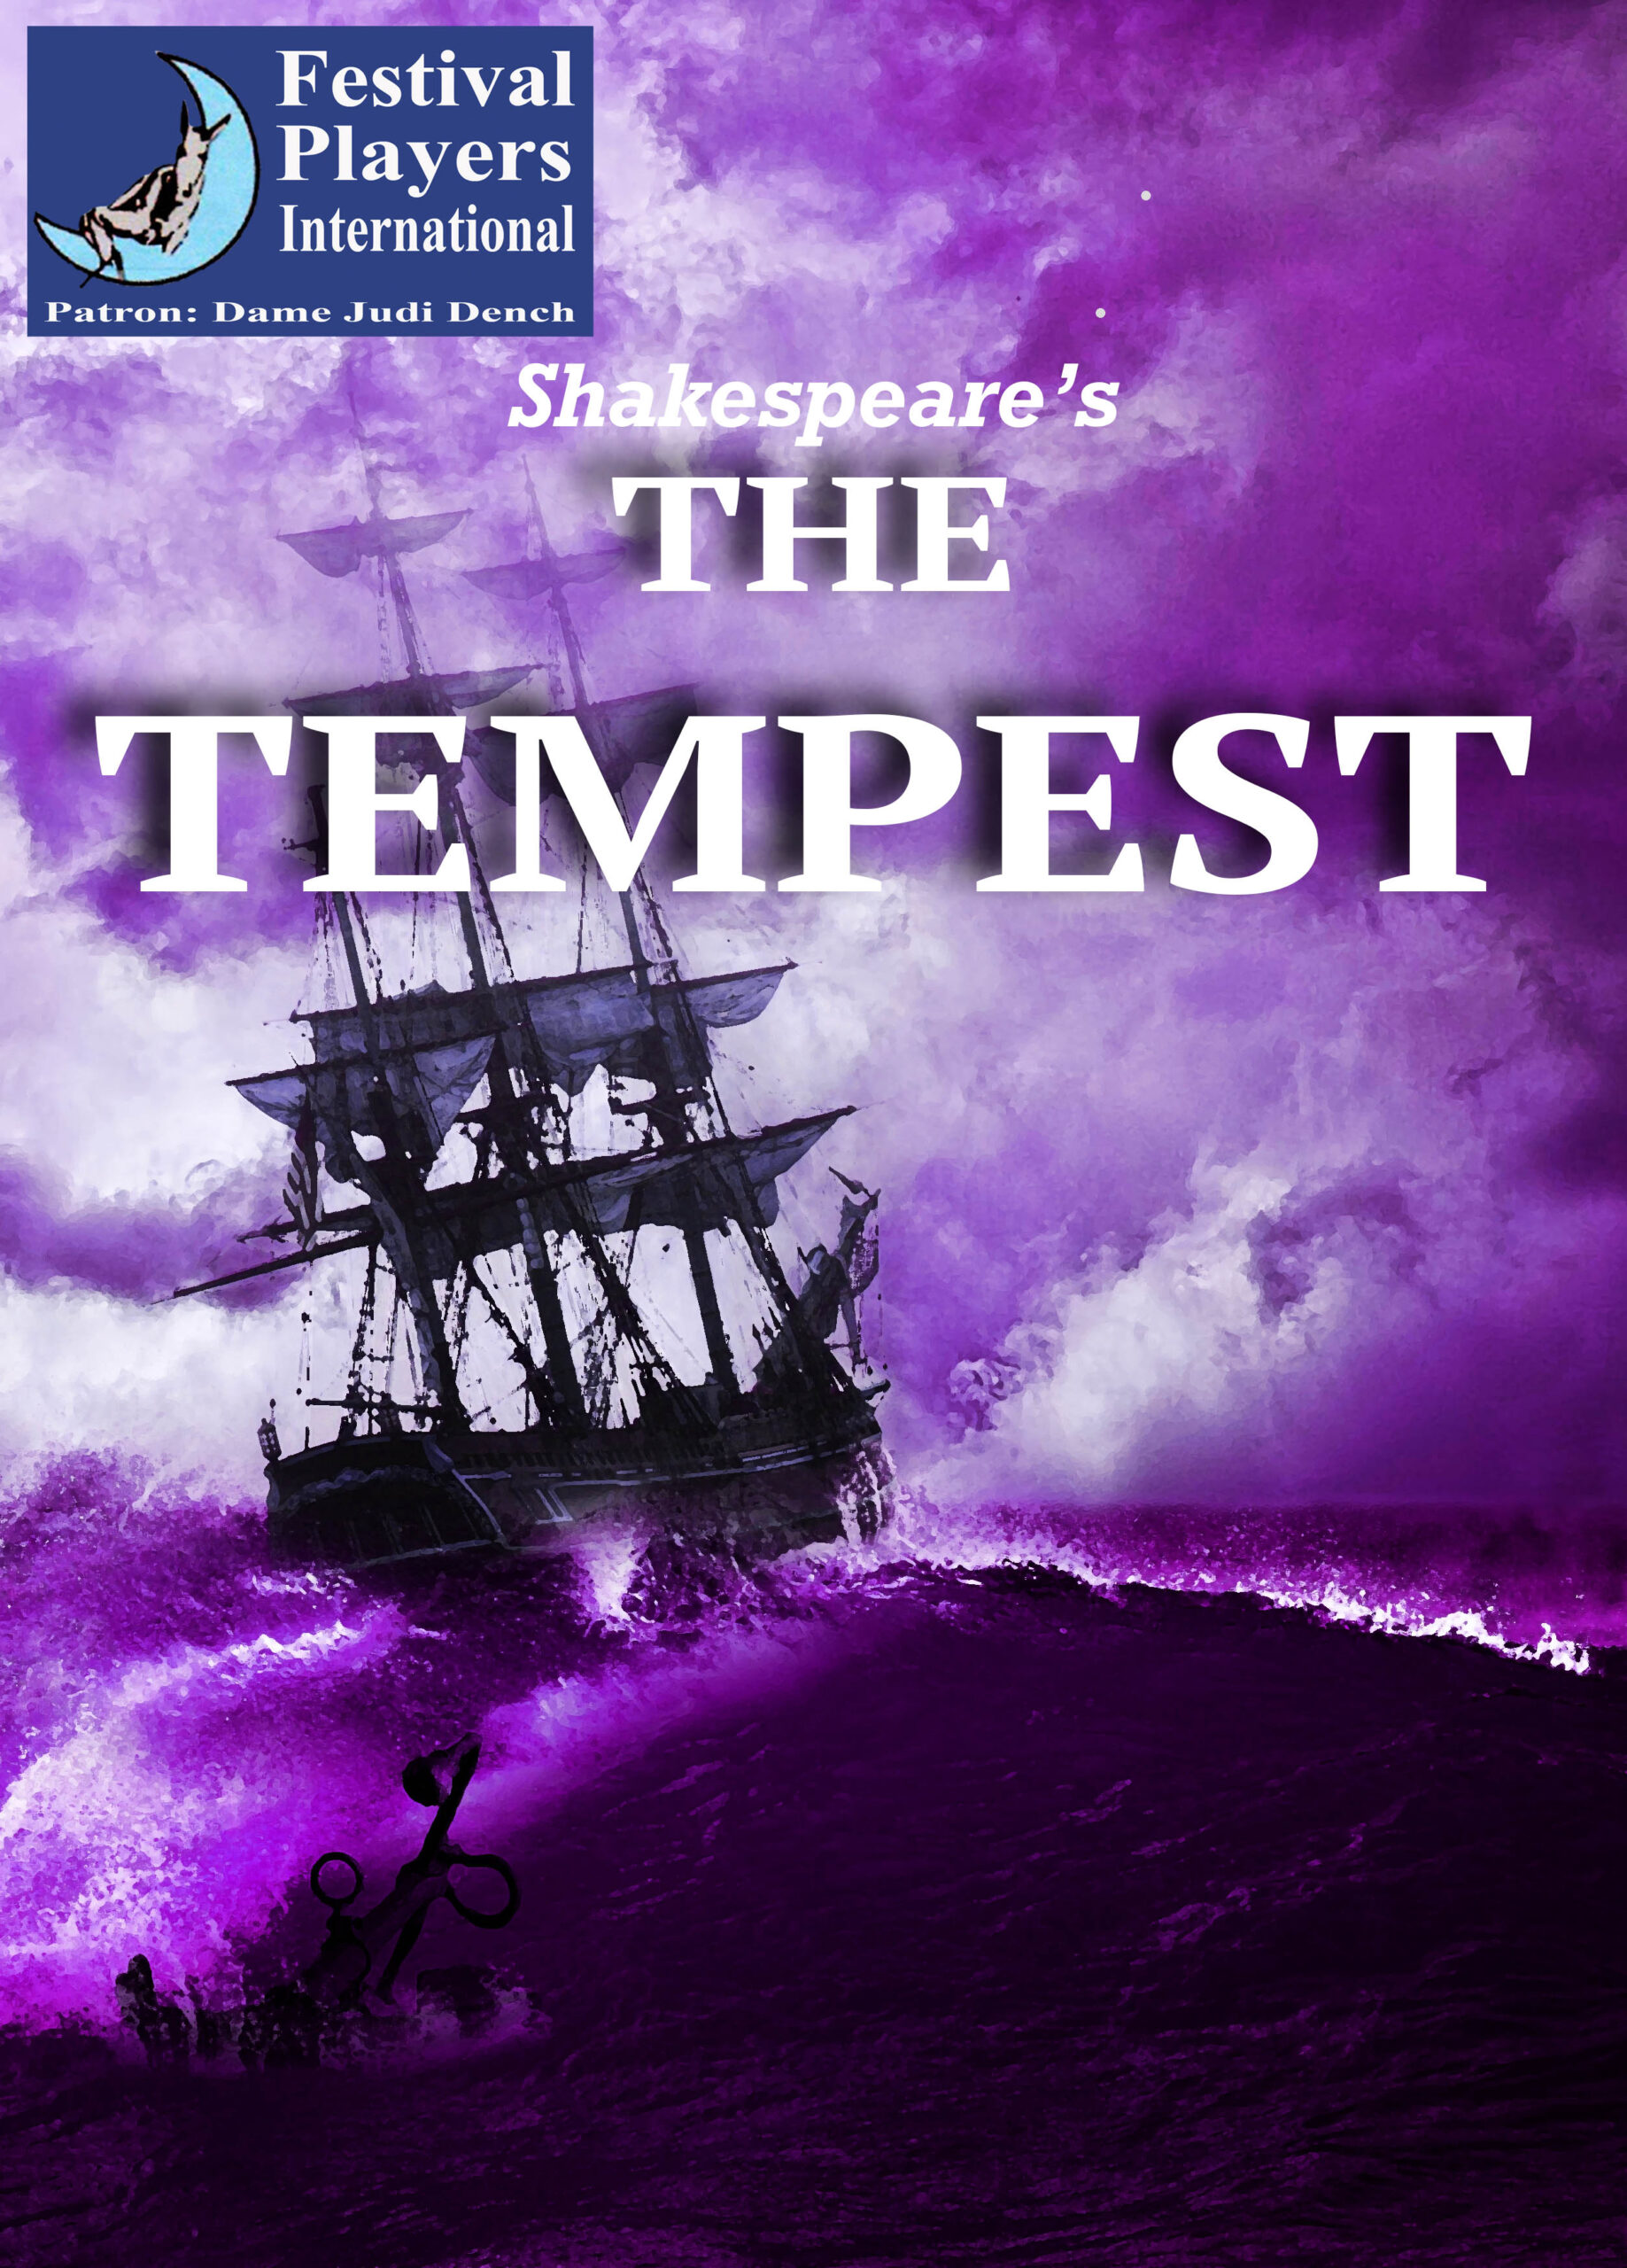 Festival Players – The Tempest